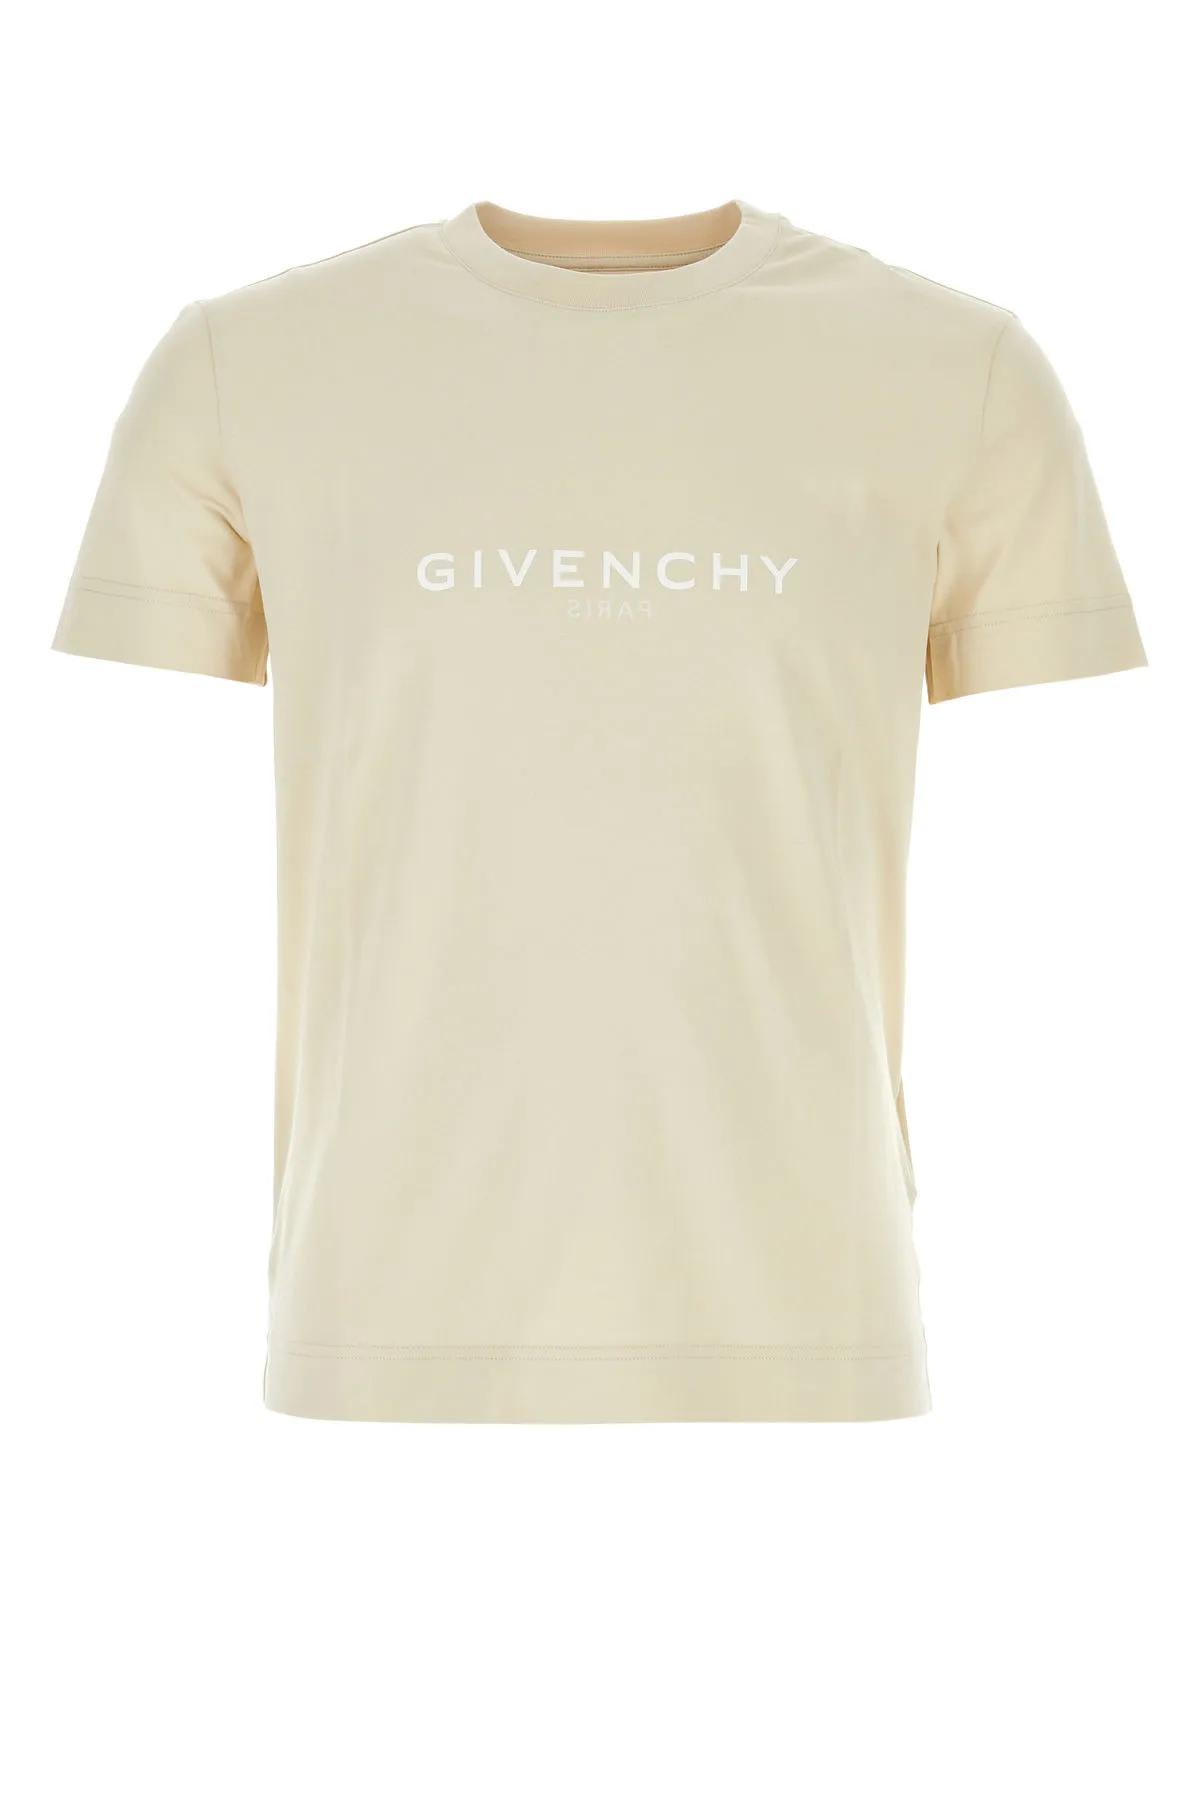 Givenchy Sand Cotton T-shirt In Neutral